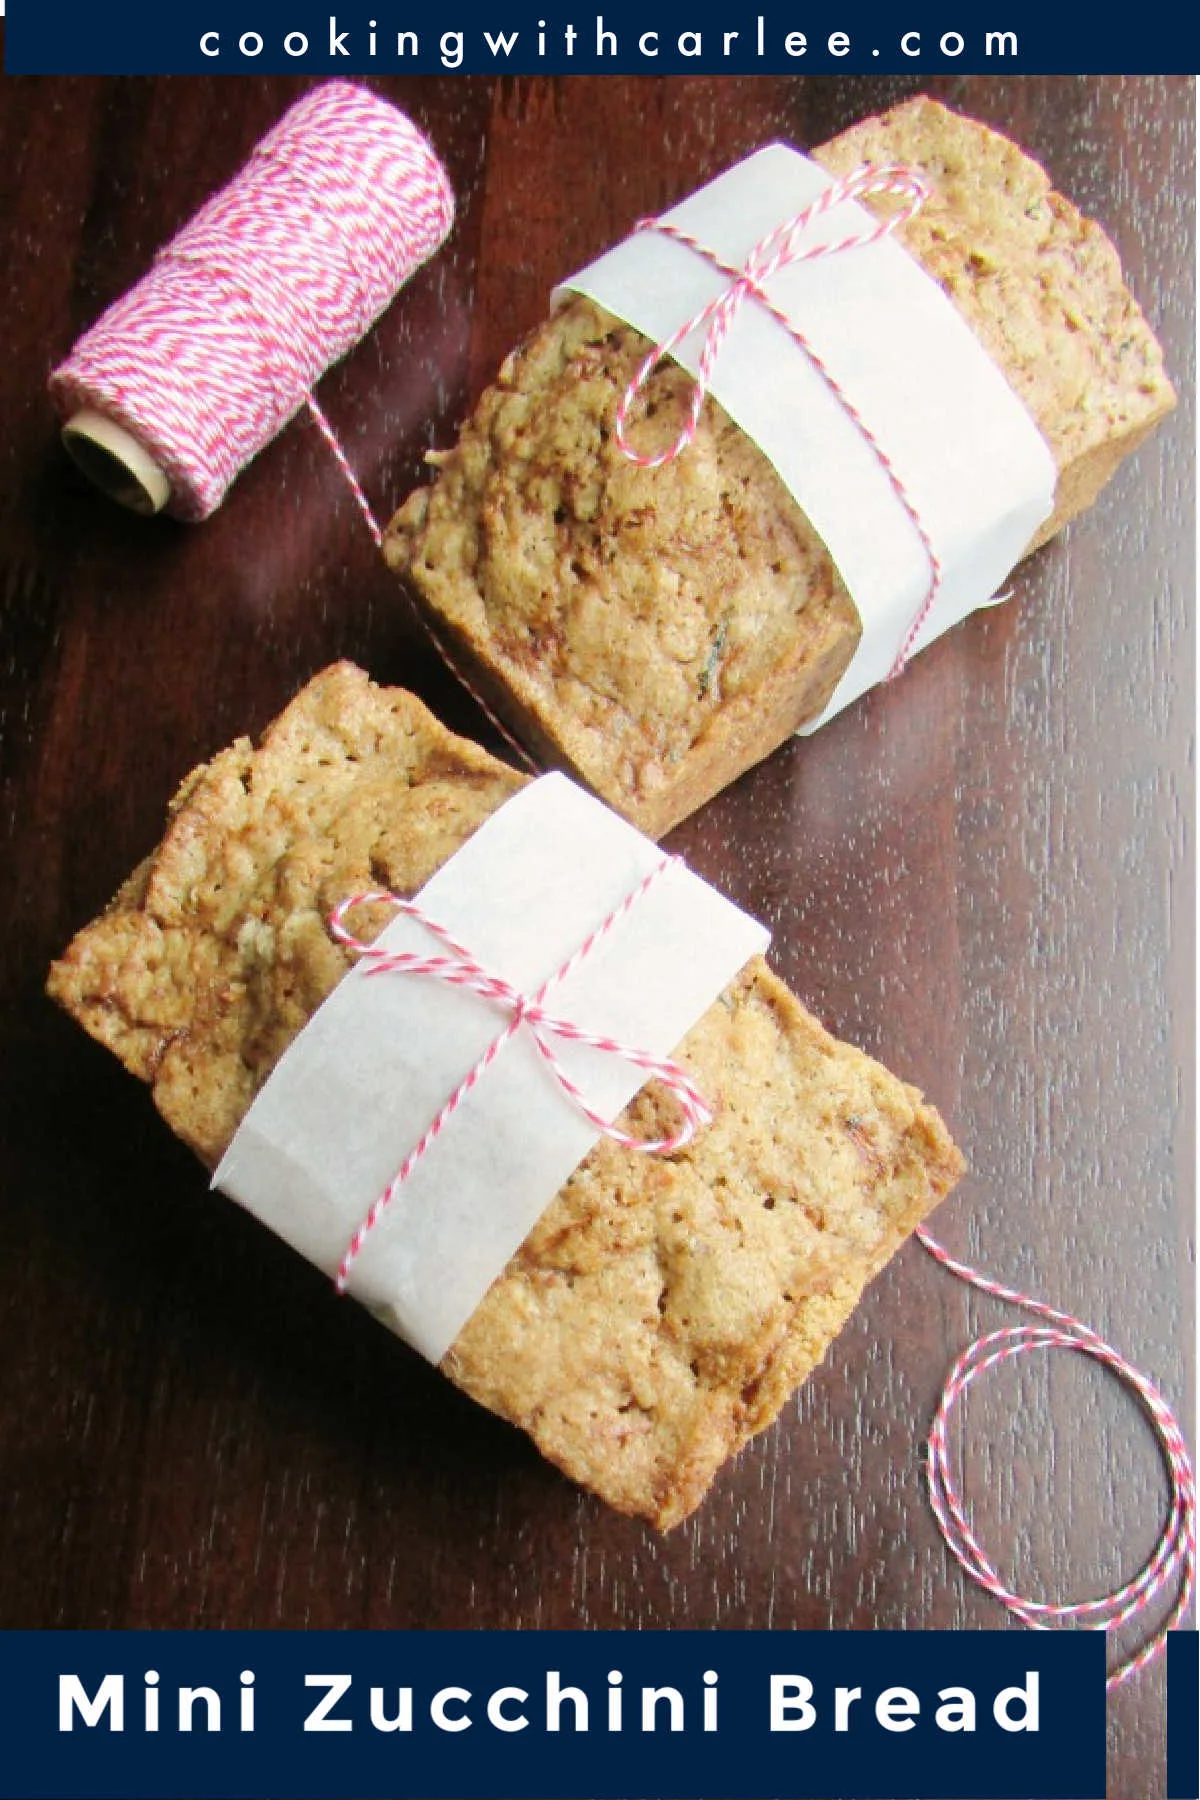 When you have extra zucchini laying around, you have to make zucchini bread. This quick bread is delicious and loaded with shredded squash. It is lightly spiced, just the right amount of sweet and super tasty. Make some for yourself and some for gifts. You can even freeze some for later!